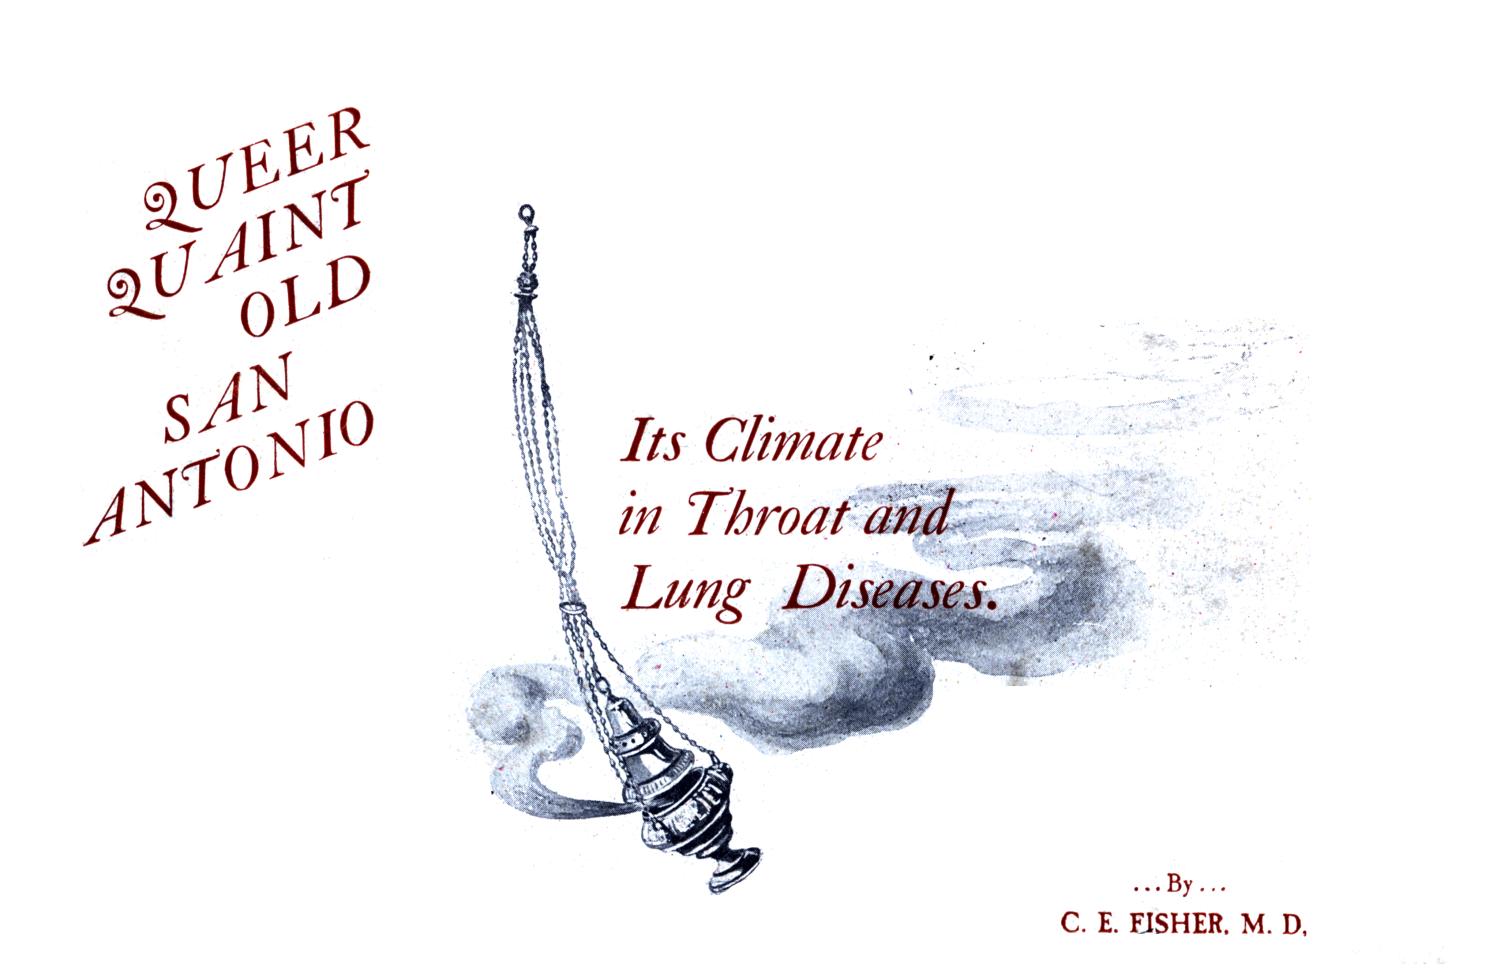 Queer, Quaint Old San Antonio: Its Climate in Throat and Lung Diseases
                                                
                                                    Title Page
                                                